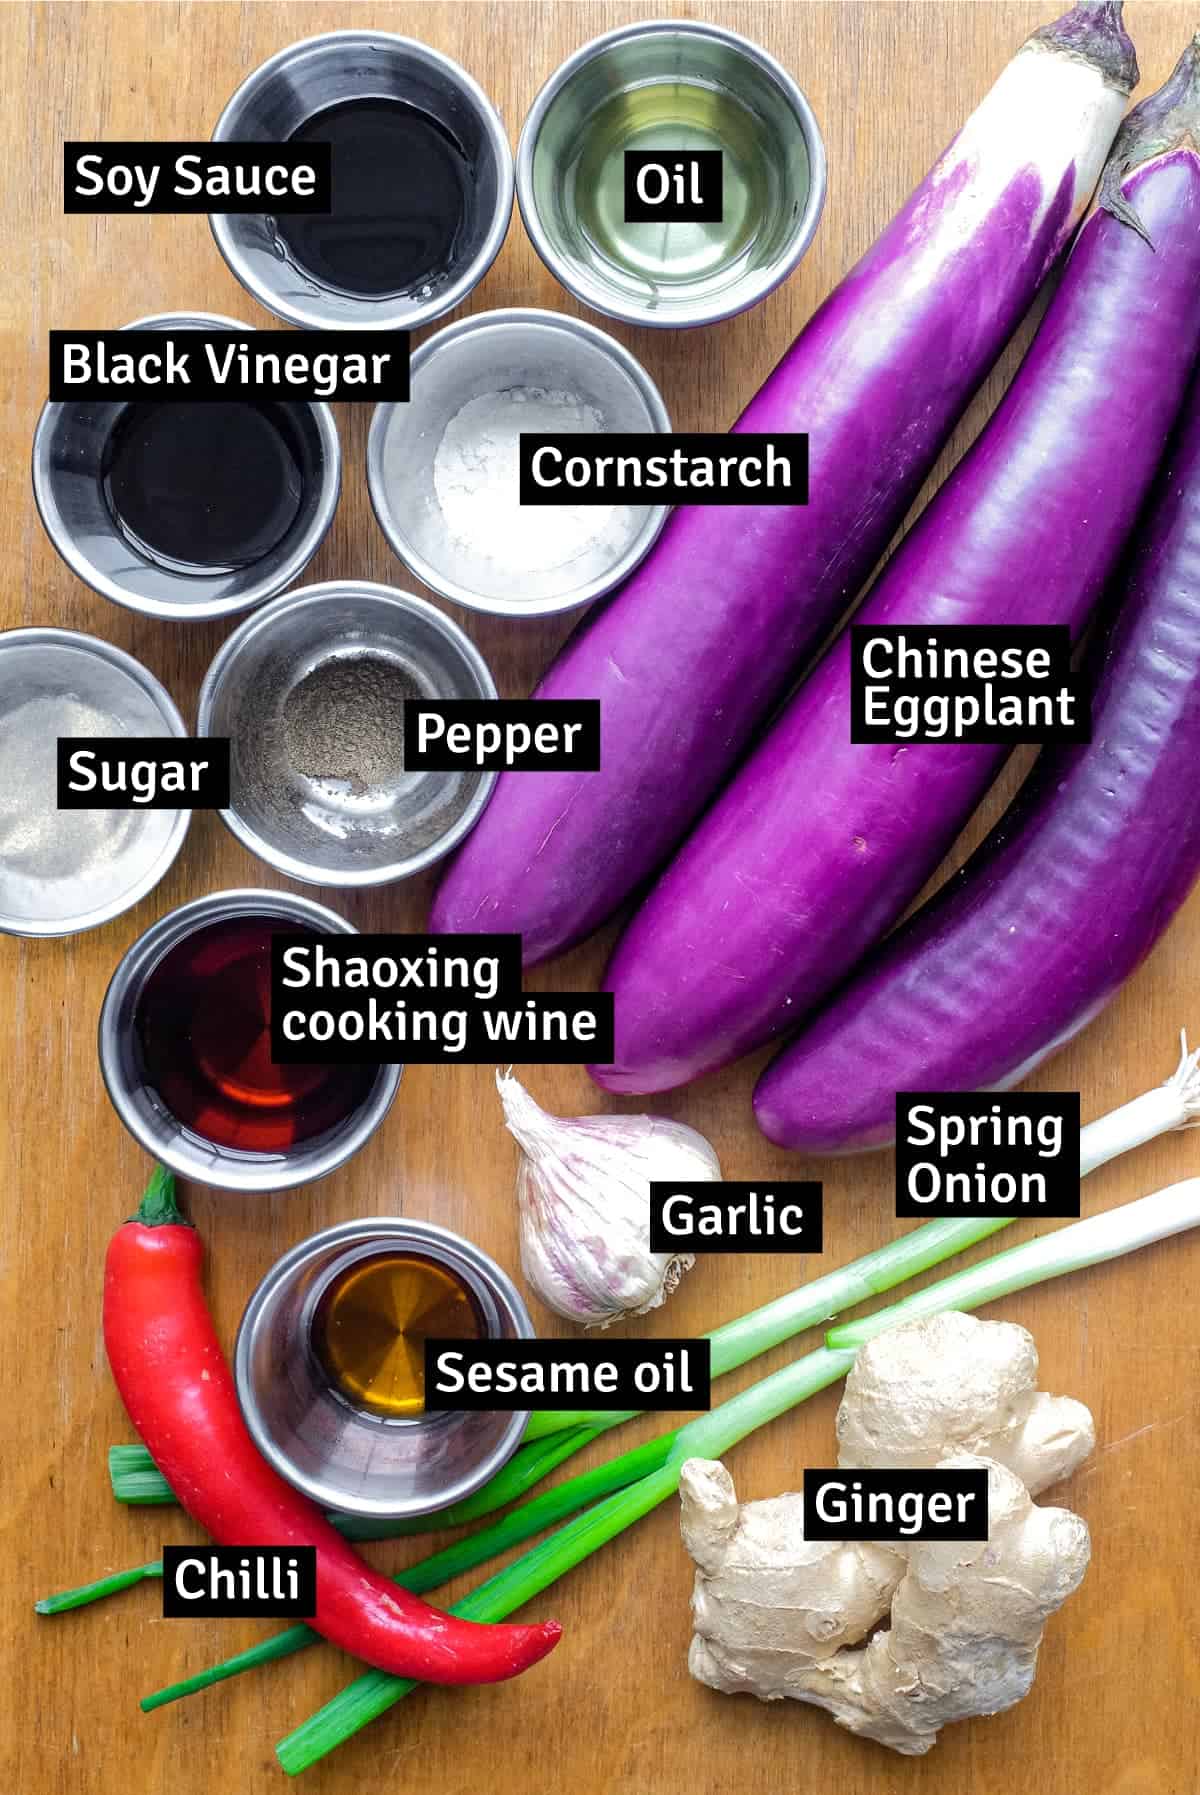 The ingredients for Chinese stir-fried eggplant